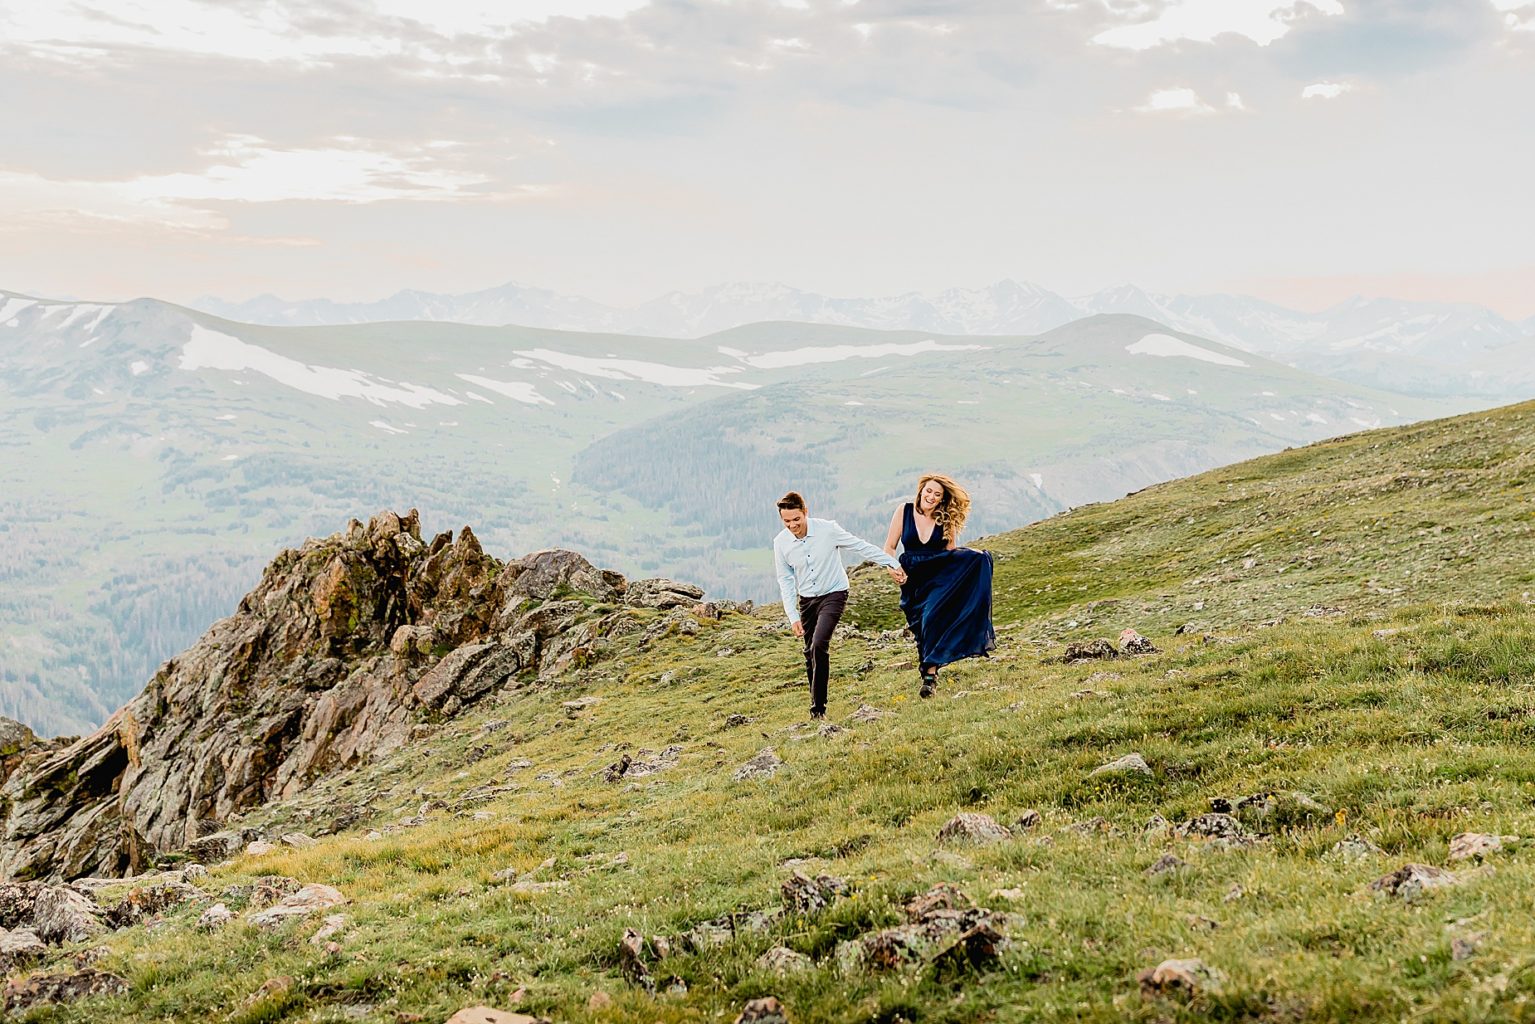 man and woman skip holding hands while laughing in the green grass with majestic Rocky Mountain scenery